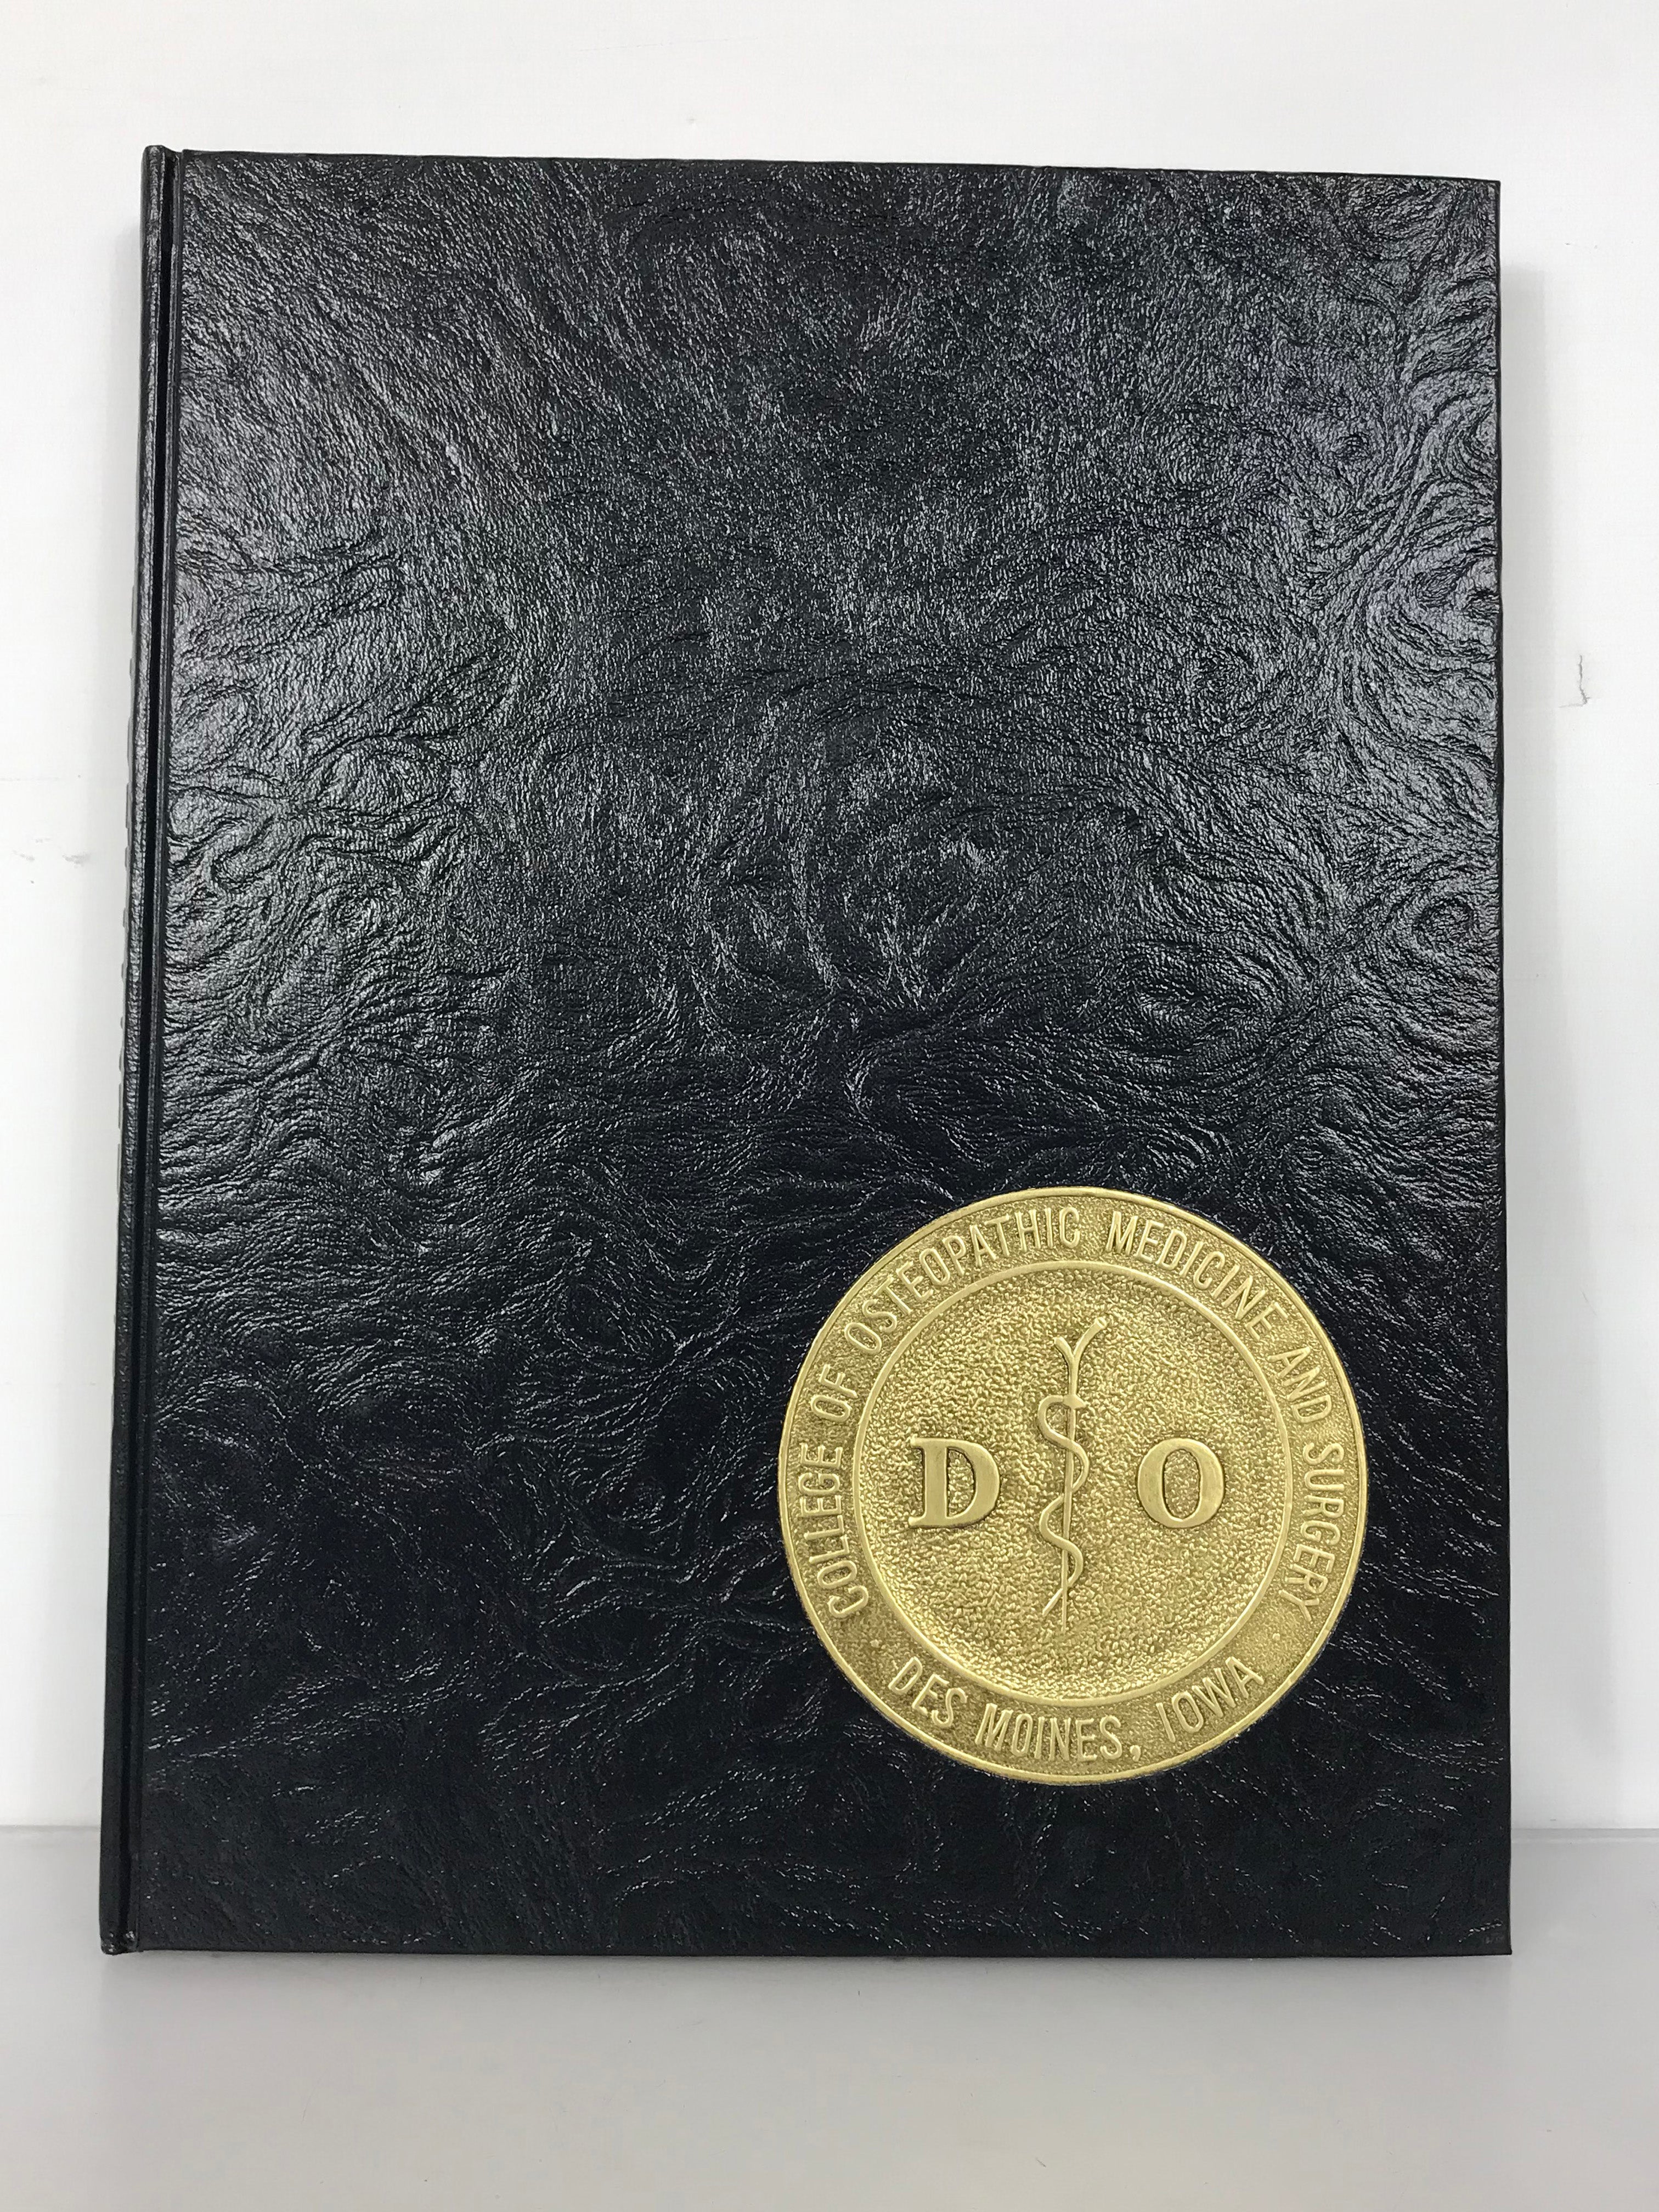 1976 College of Osteopathic Medicine and Surgery Yearbook Des Moines Iowa